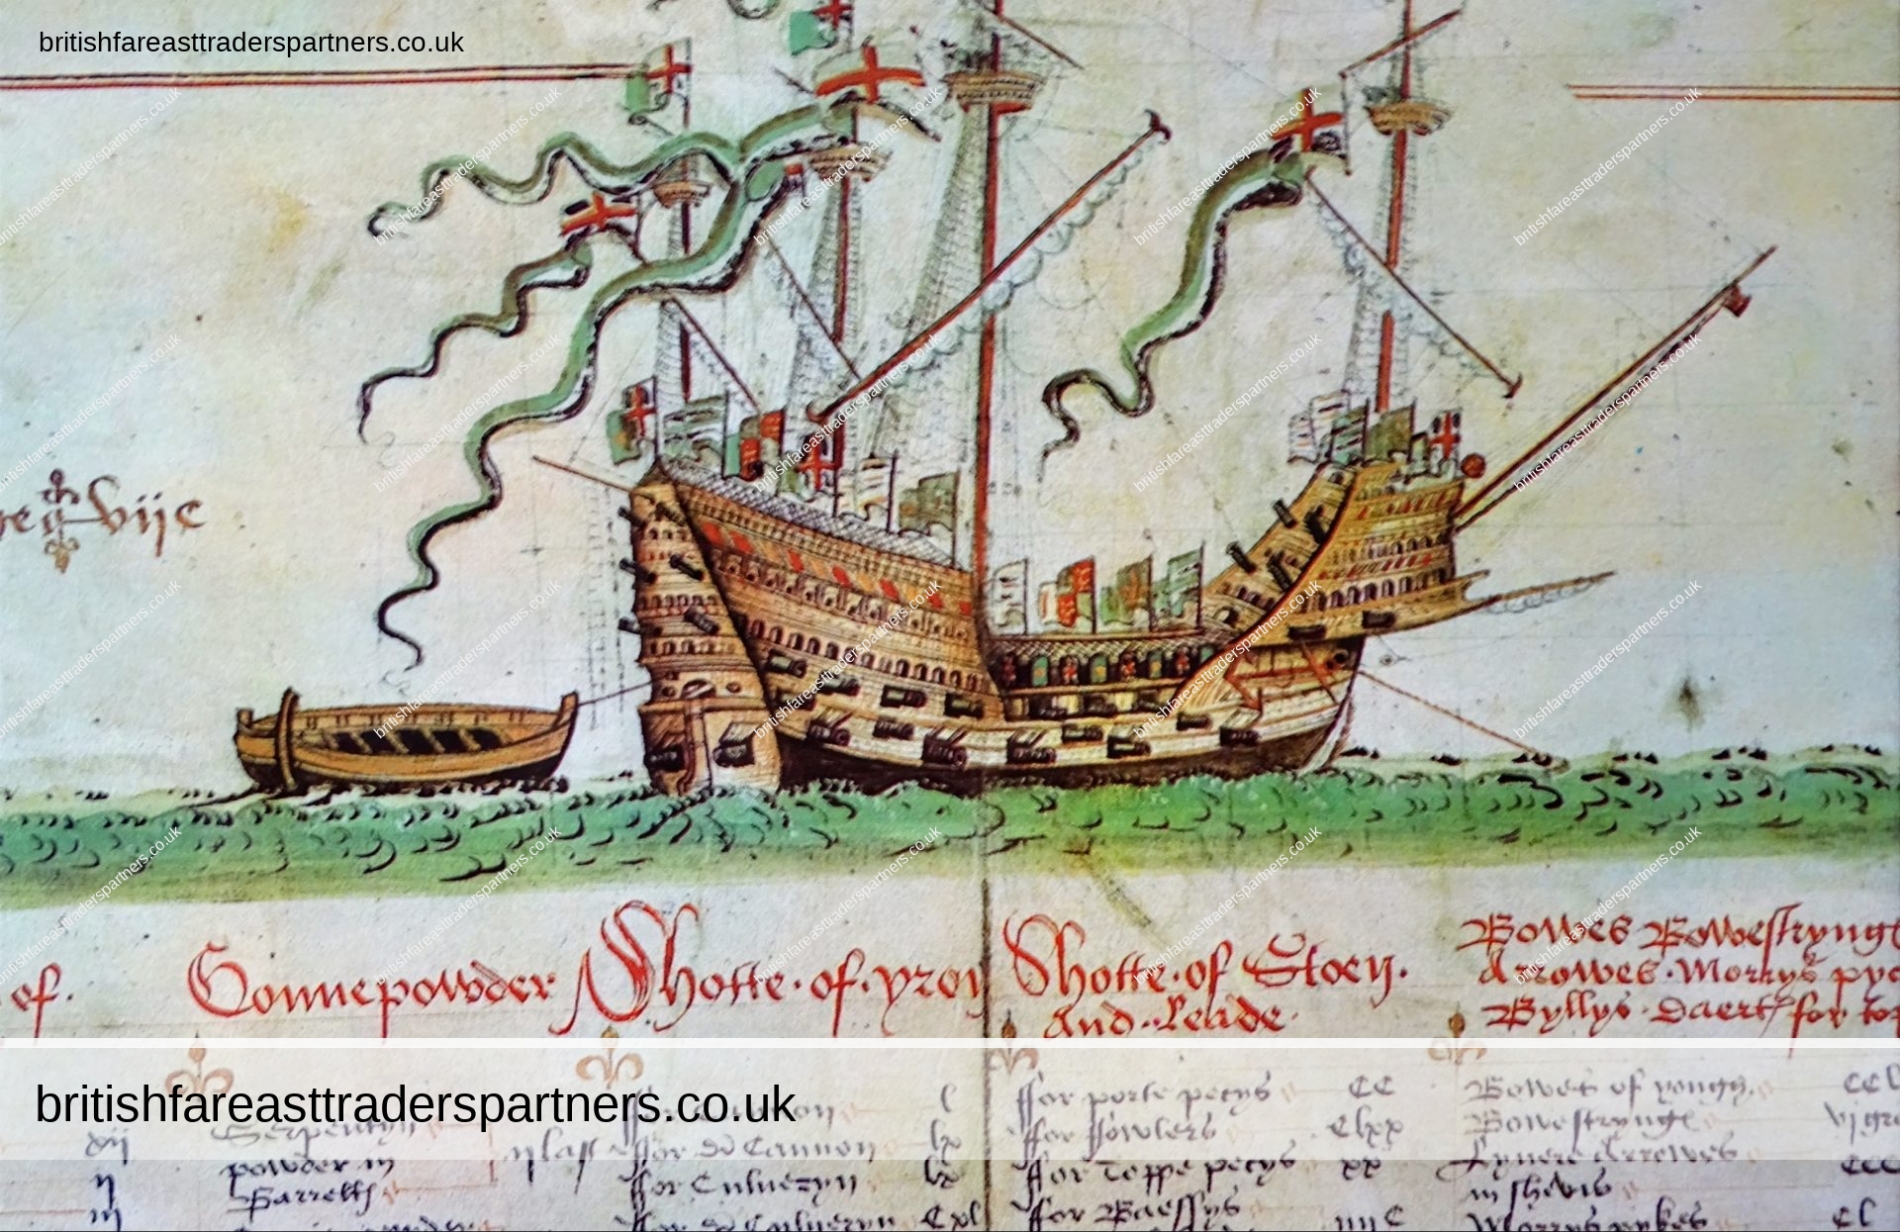 “THE MARY ROSE” POSTCARD COPYRIGHT 1980 MARY ROSE TRADING LTD. SOVEREIGN PRINTING GROUP SIDMOUTH, DEVON REPRODUCED BY KIND PERMISSION OF THE MASTER AND FELLOWS OF MAGDALENE COLLEGE, CAMBRIDGE PRINTED IN ENGLAND Collectables > Transportation Collectables > Nautical > Other Nautical MARITIME | HERITAGE | HISTORY | TUDOR MONARCH